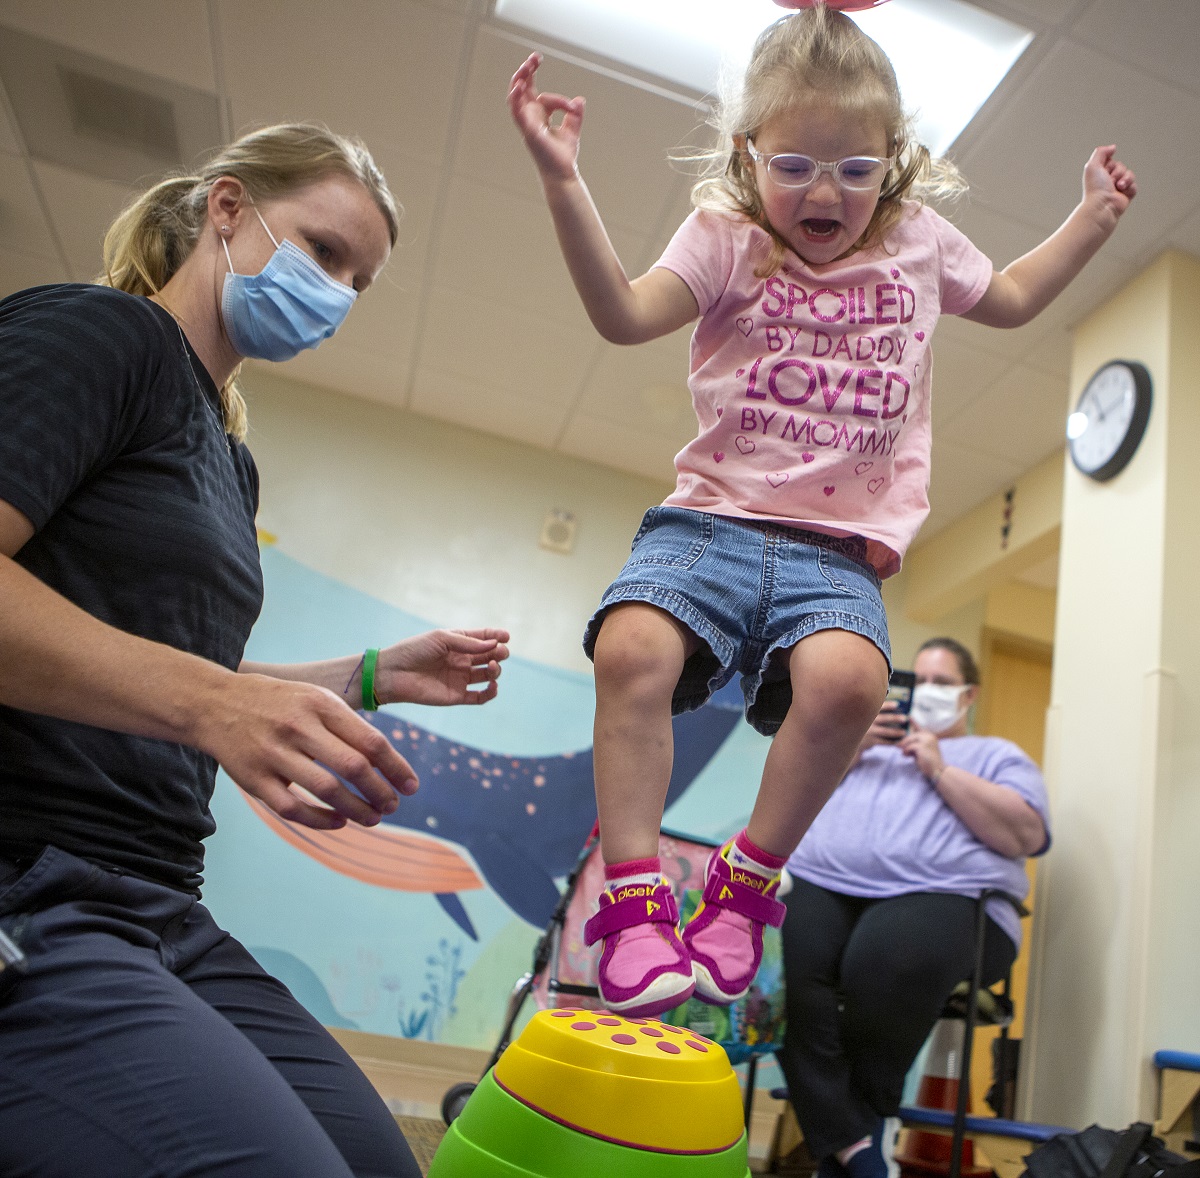 Joella Migliori jumps over a plastic stepping stone in a physical therapy room. Physical therapist Emily Hoffman, who has her hair in a pony tail and wears a face mask, kneels beside her. Joella, who wears glasses and has short hair pulled back in a barrette, wears a T-shirt that says “Spoiled by Daddy, loved by Mommy” with shorts and sneakers. Janette Migliori, Joella’s mother, sits in a chair in the background and holds up to phone to take a picture.